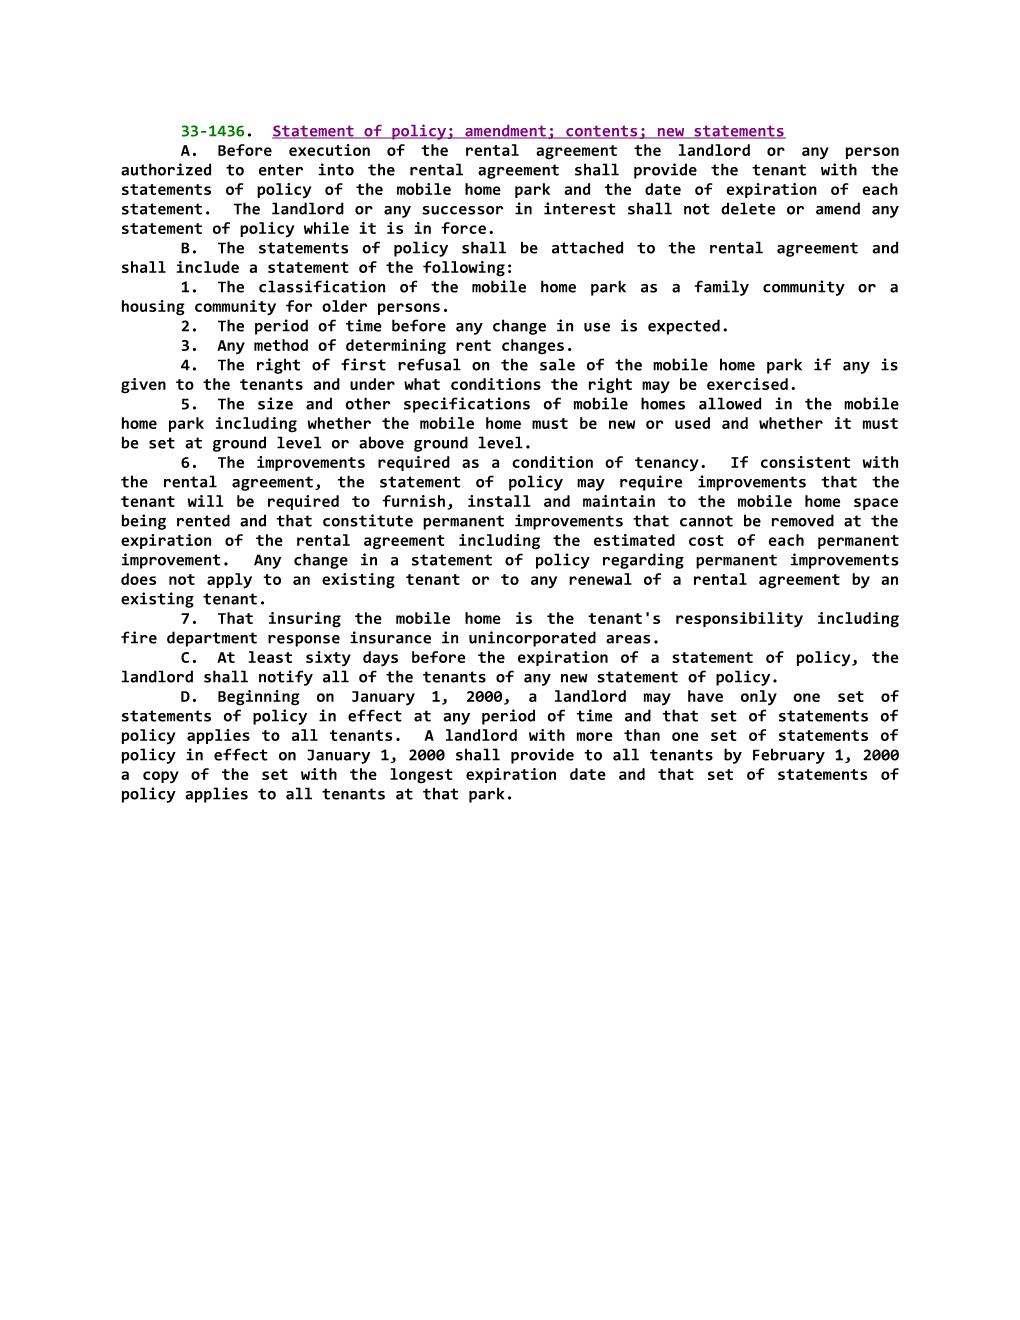 33-1436; Statement of Policy; Amendment; Contents; New Statements